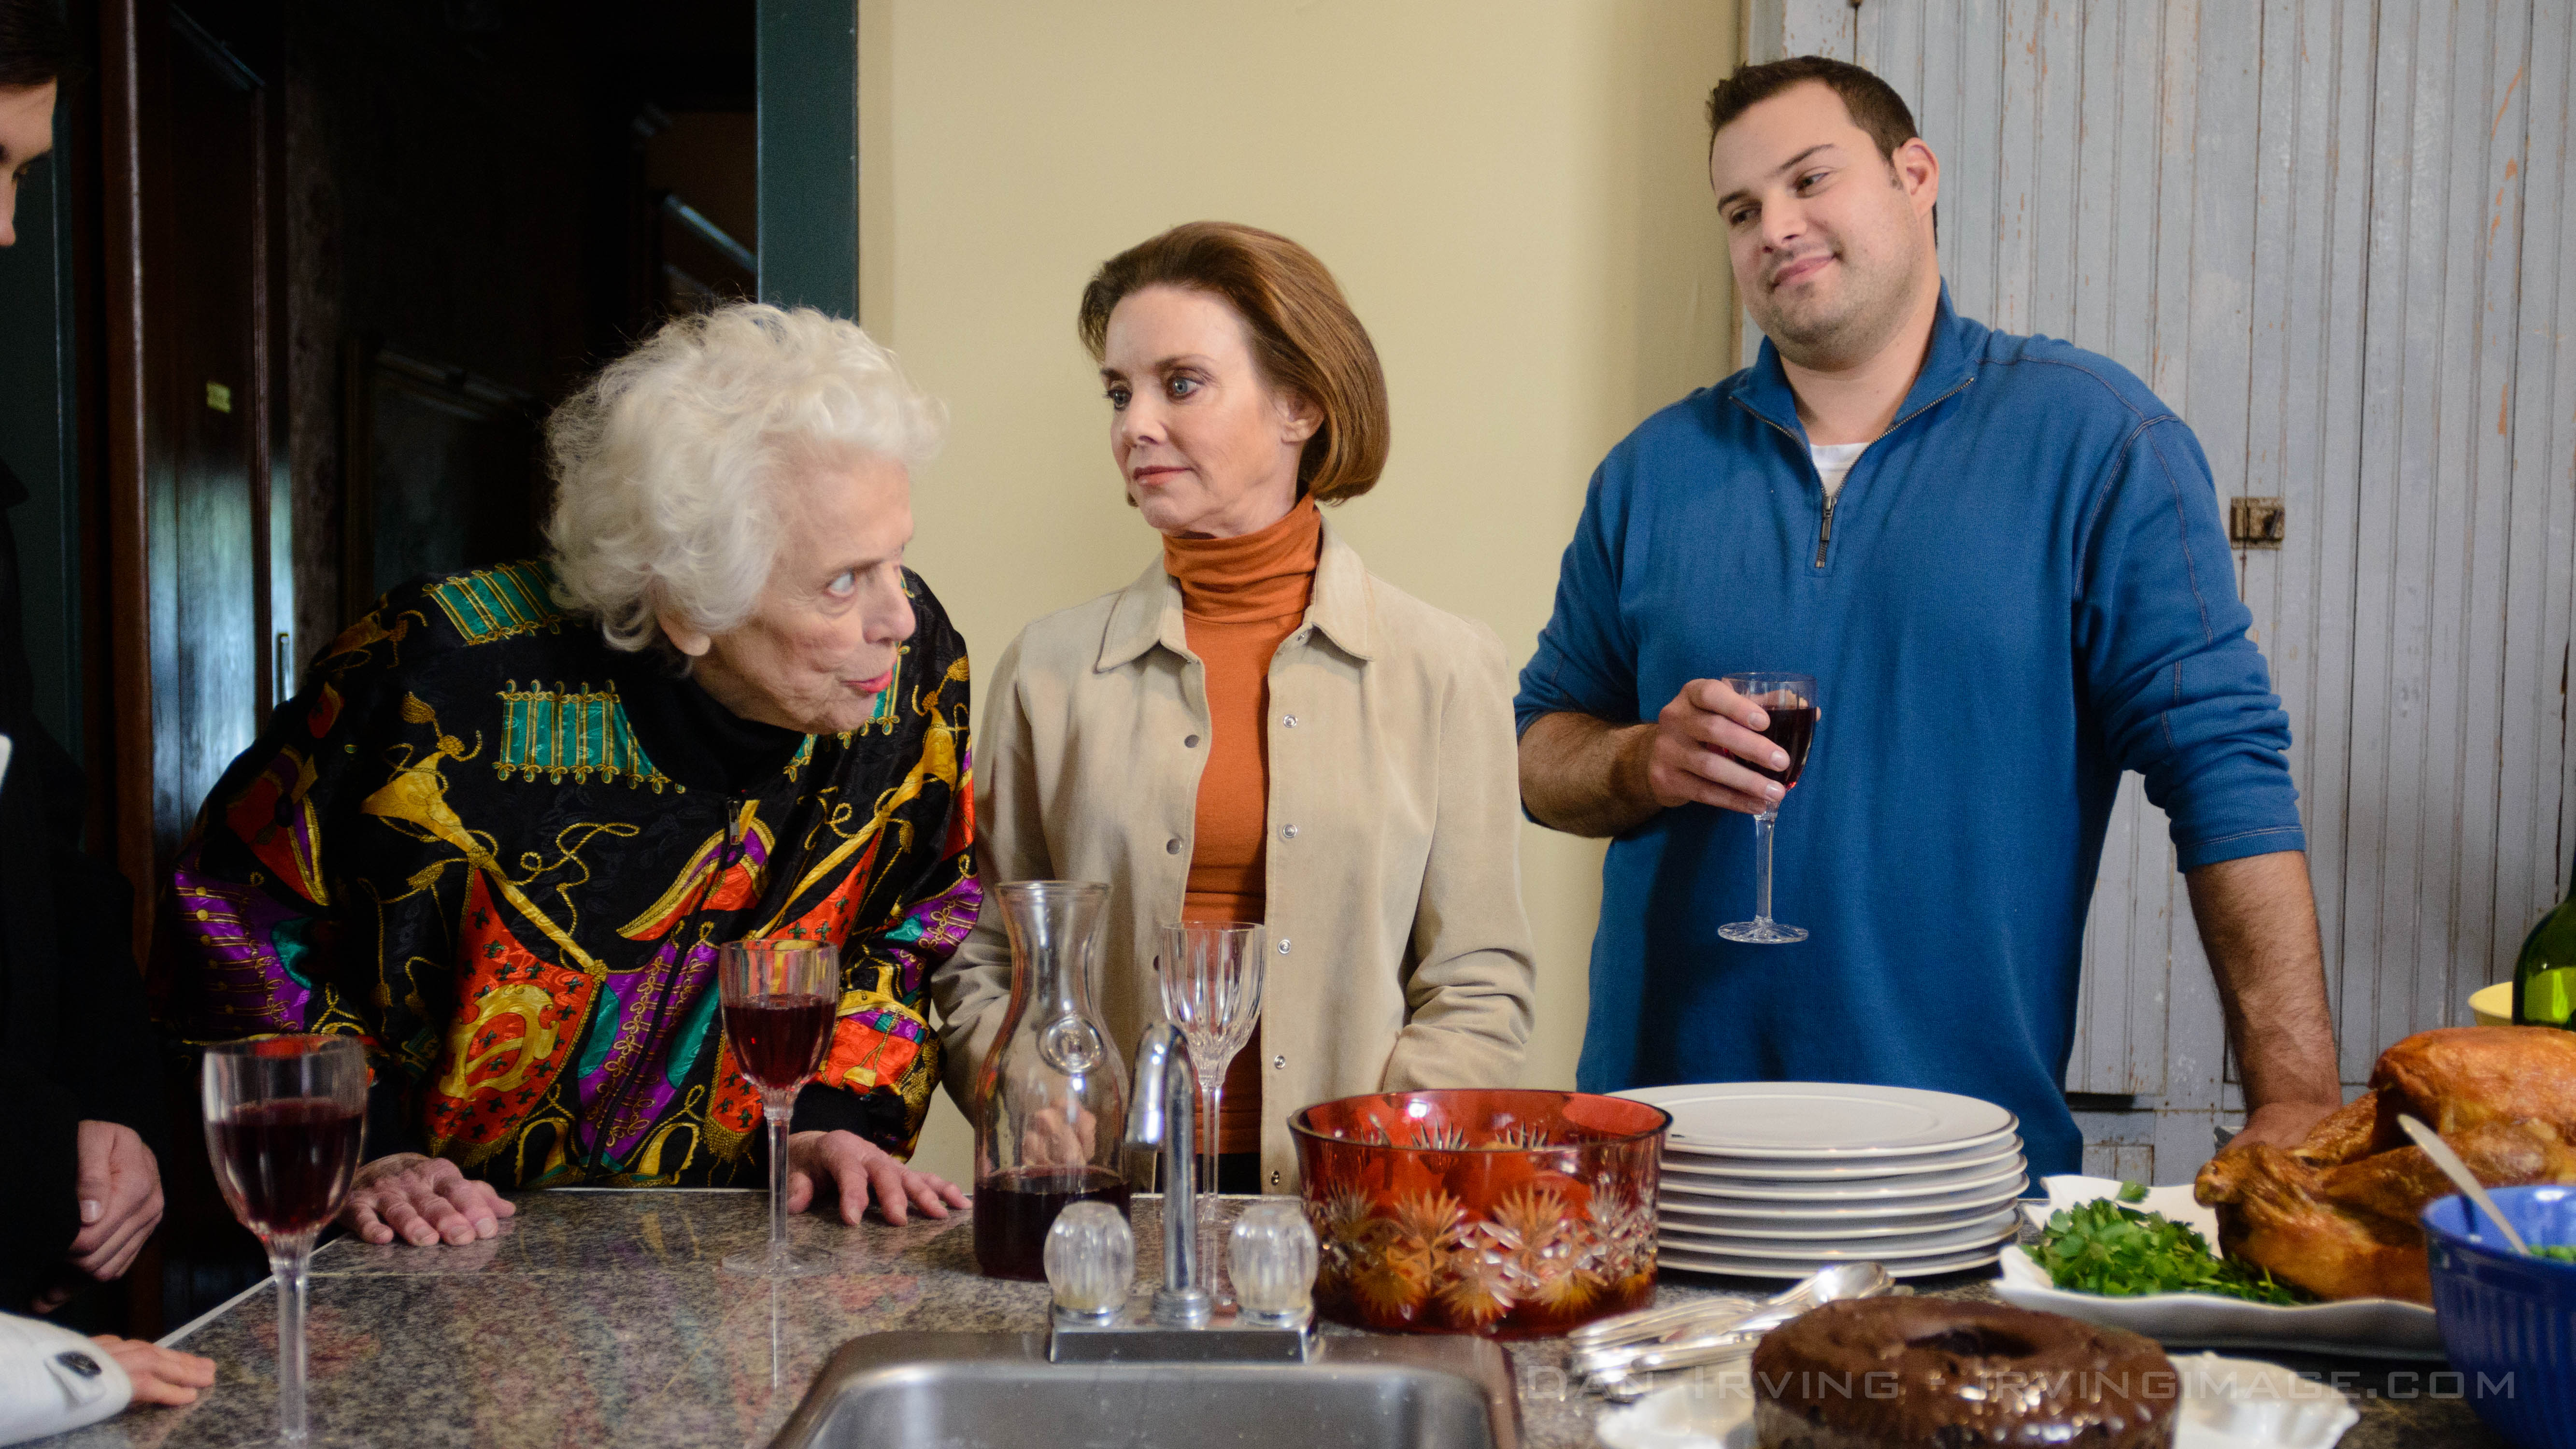 SAUGATUCK CURES with Max Adler (Glee) and Judith Chapman (The Young and the Restless)